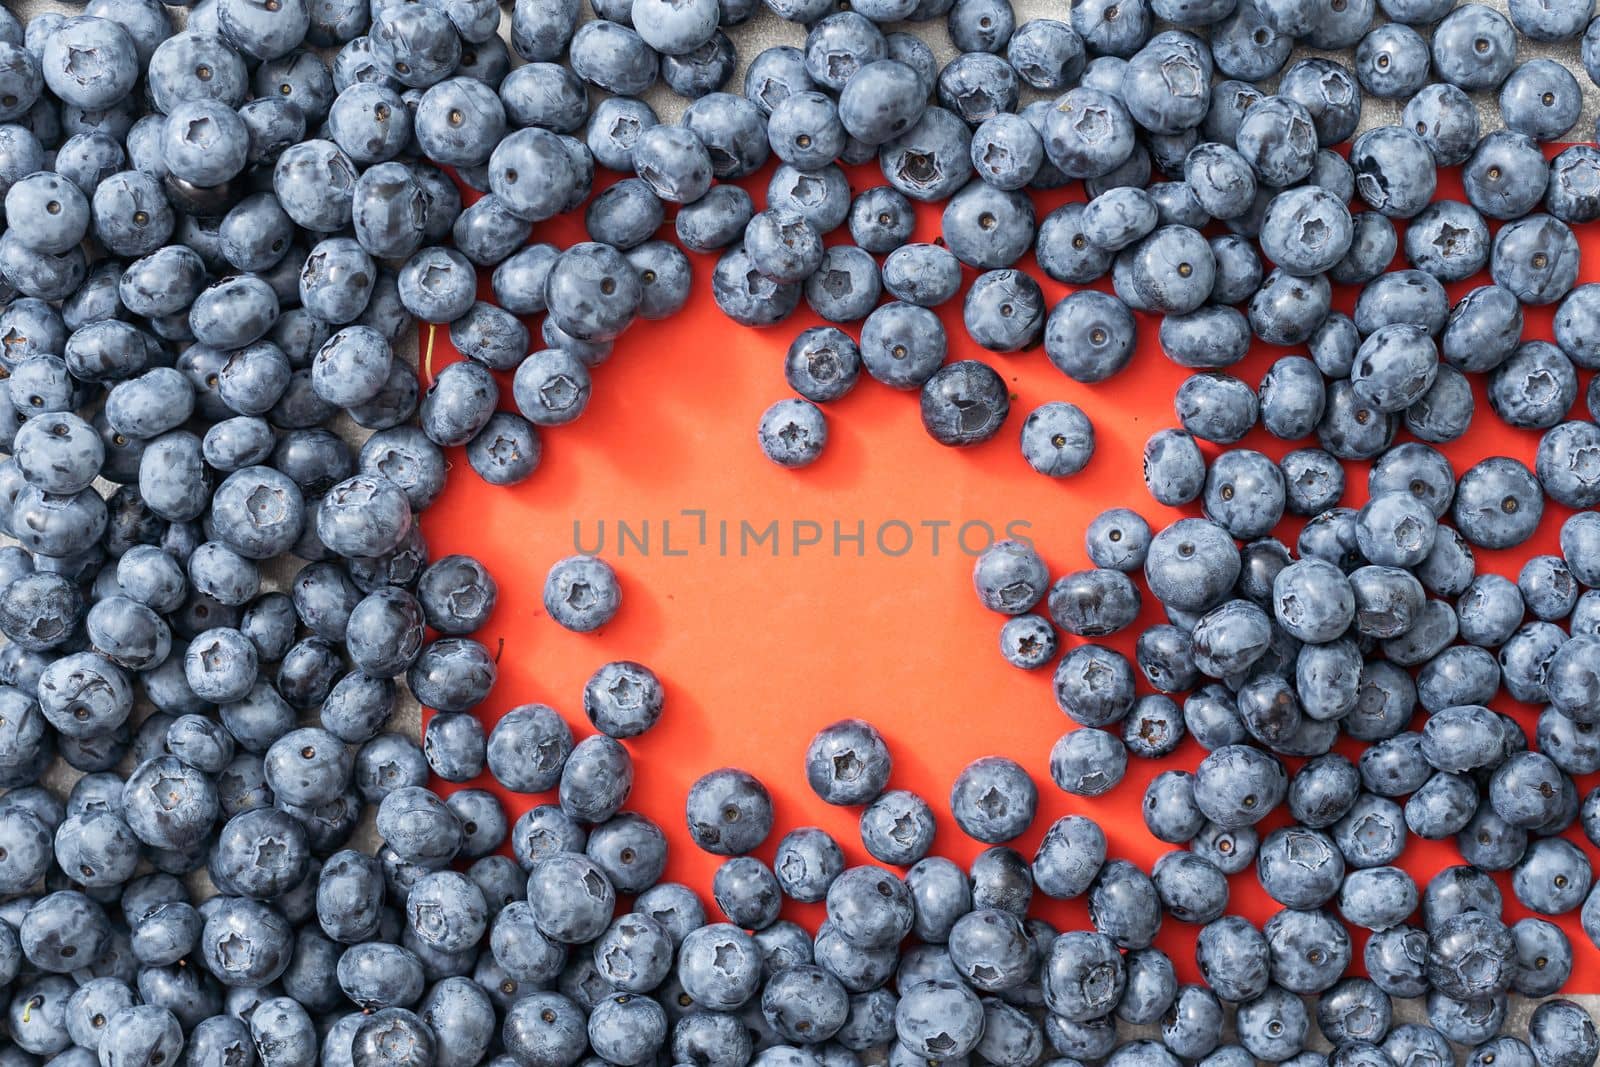 Large blueberries on a red background, close-up by Andelov13